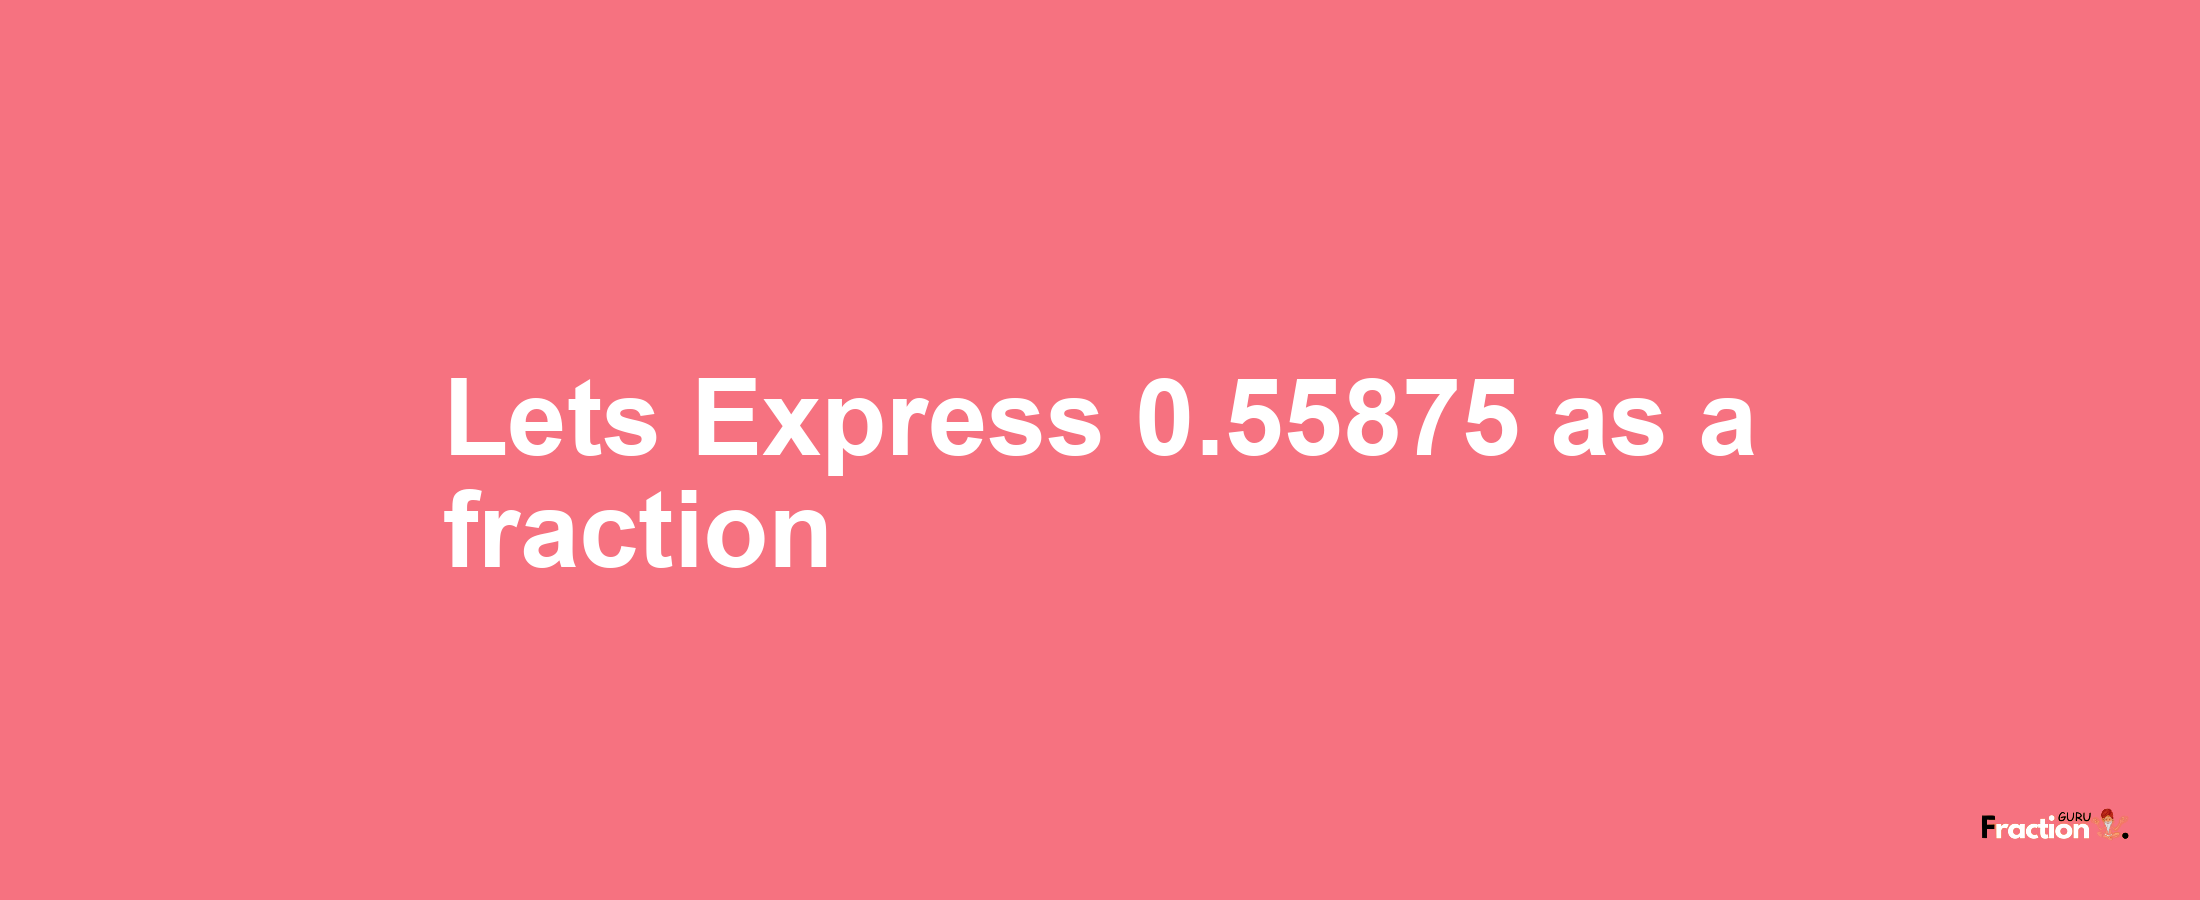 Lets Express 0.55875 as afraction